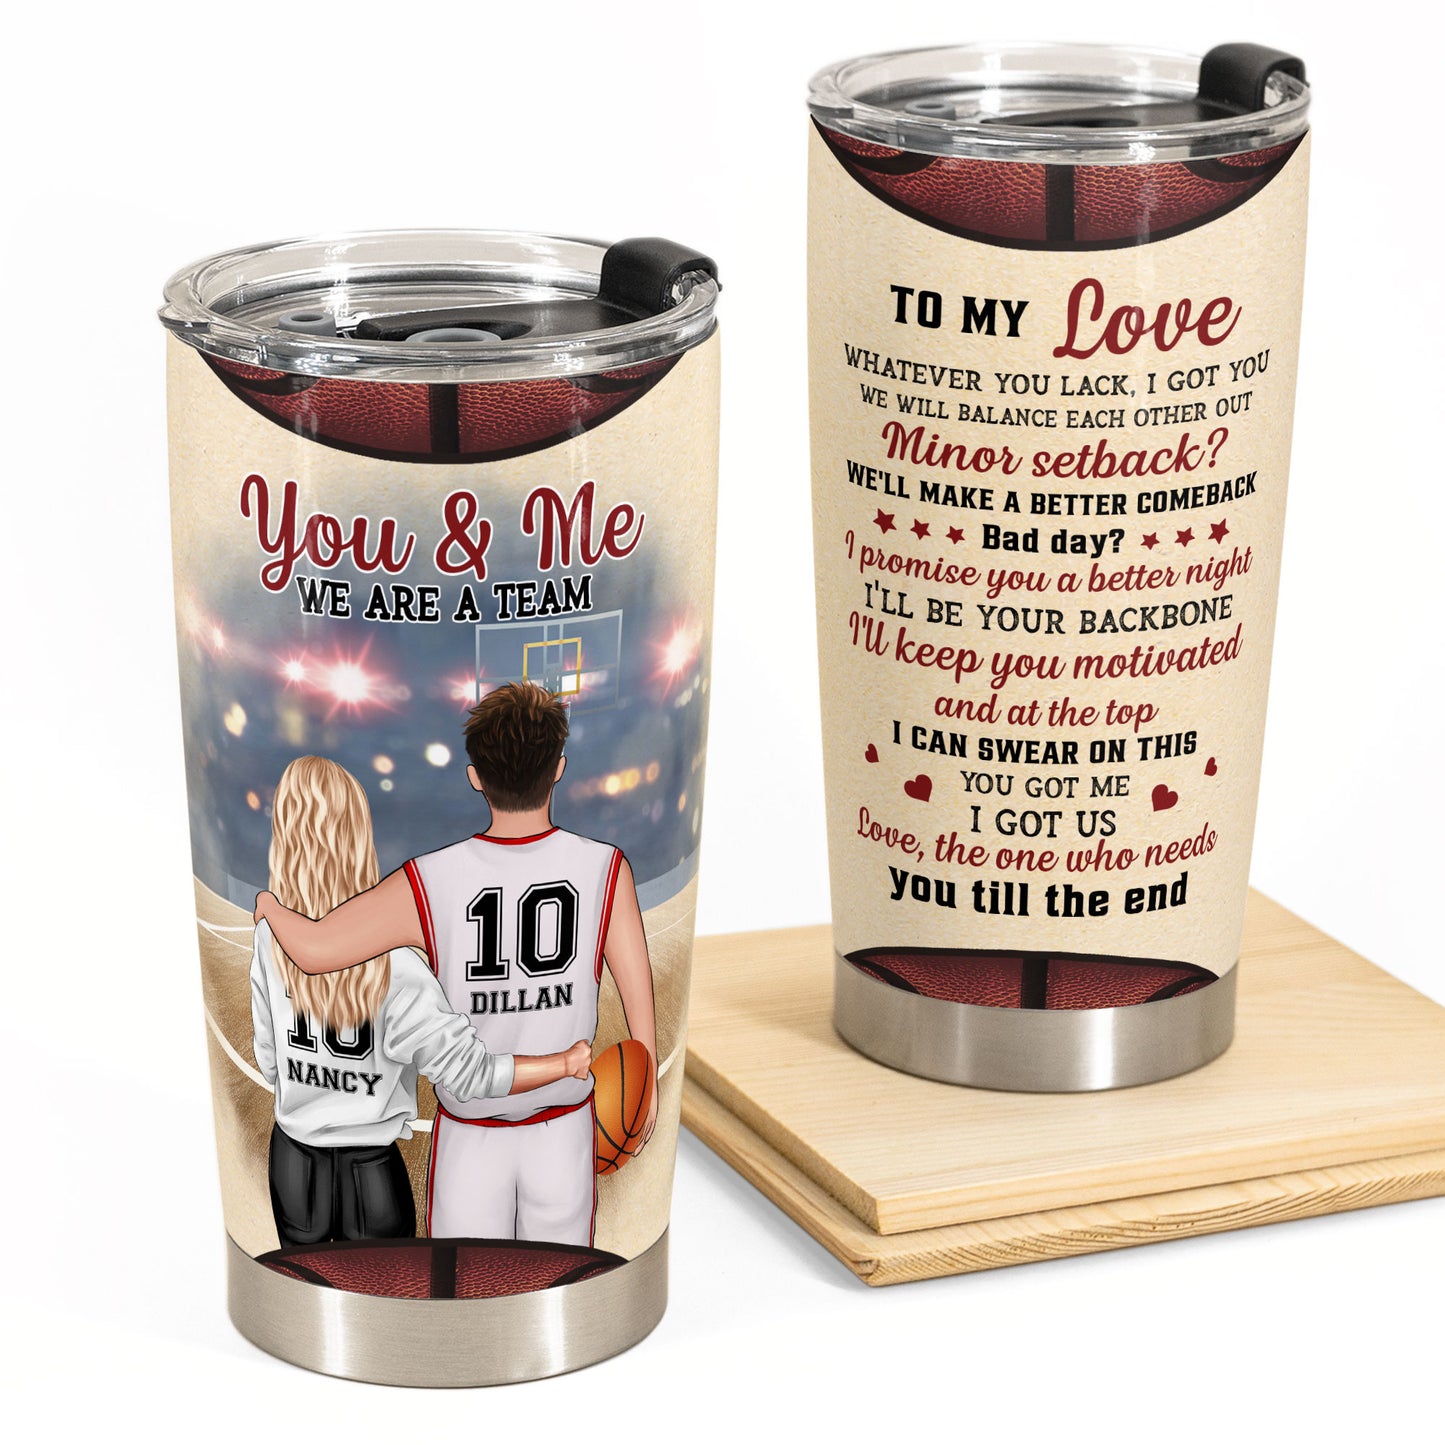 You Got Me & I Got Us - Personalized Tumbler Cup - Birthday, Loving, Christmas Gift For Basketball Players, Sons, Mom, Boyfriends, Girlfriends